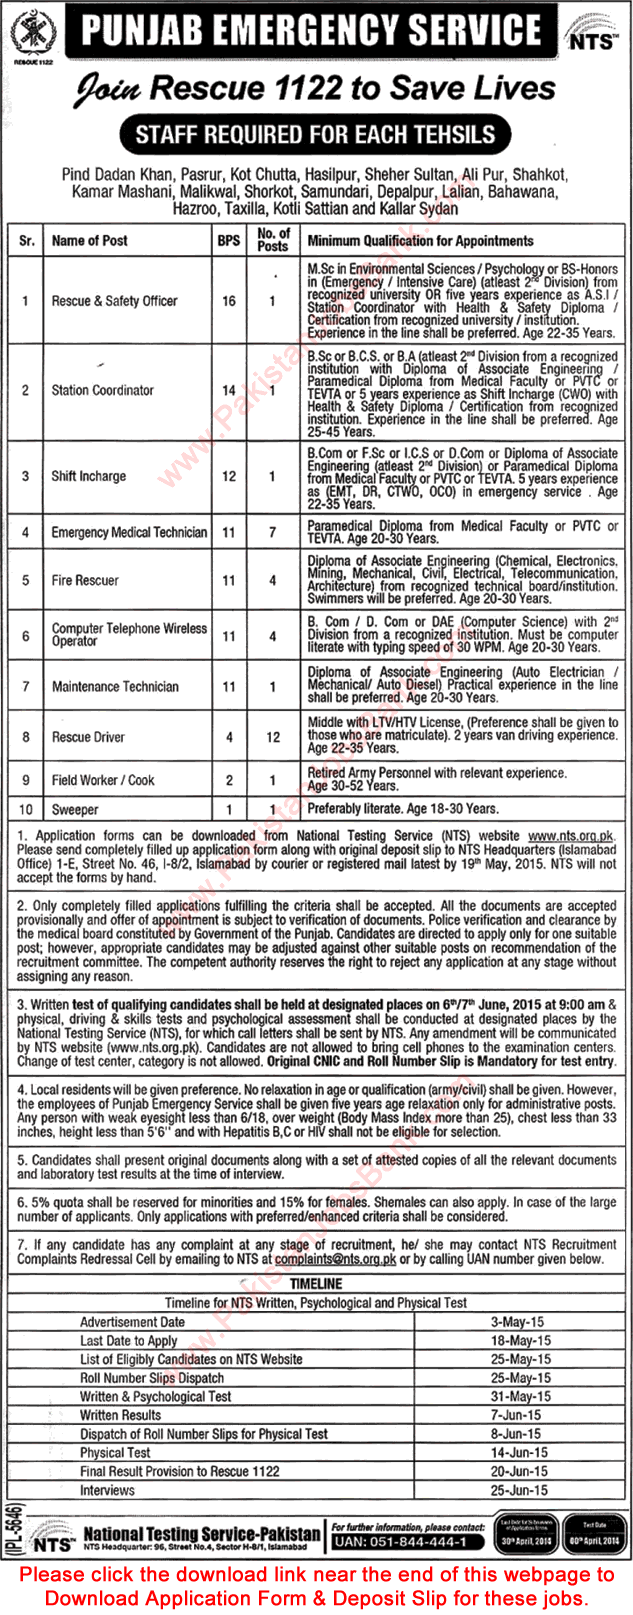 Punjab Emergency Service Rescue 1122 Jobs 2015 May NTS Application Form Tehsil Staff New